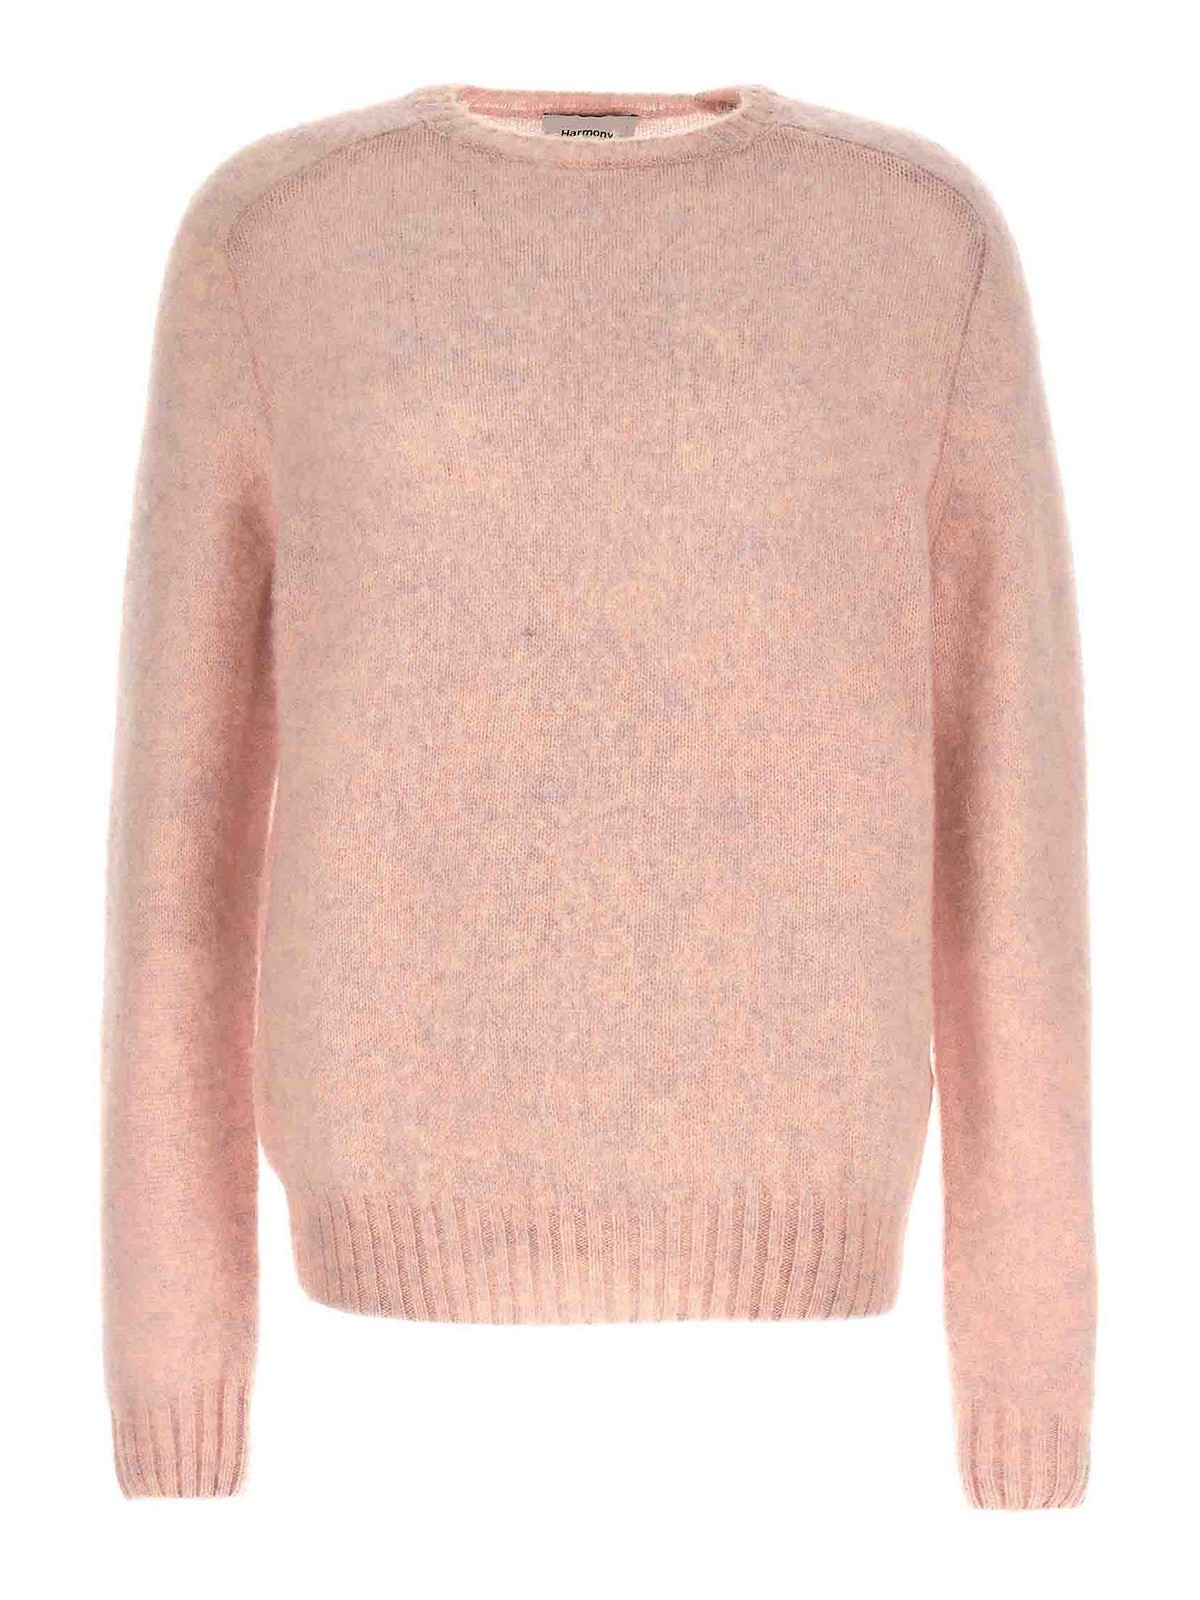 Harmony Shaggy Jumper In Nude & Neutrals